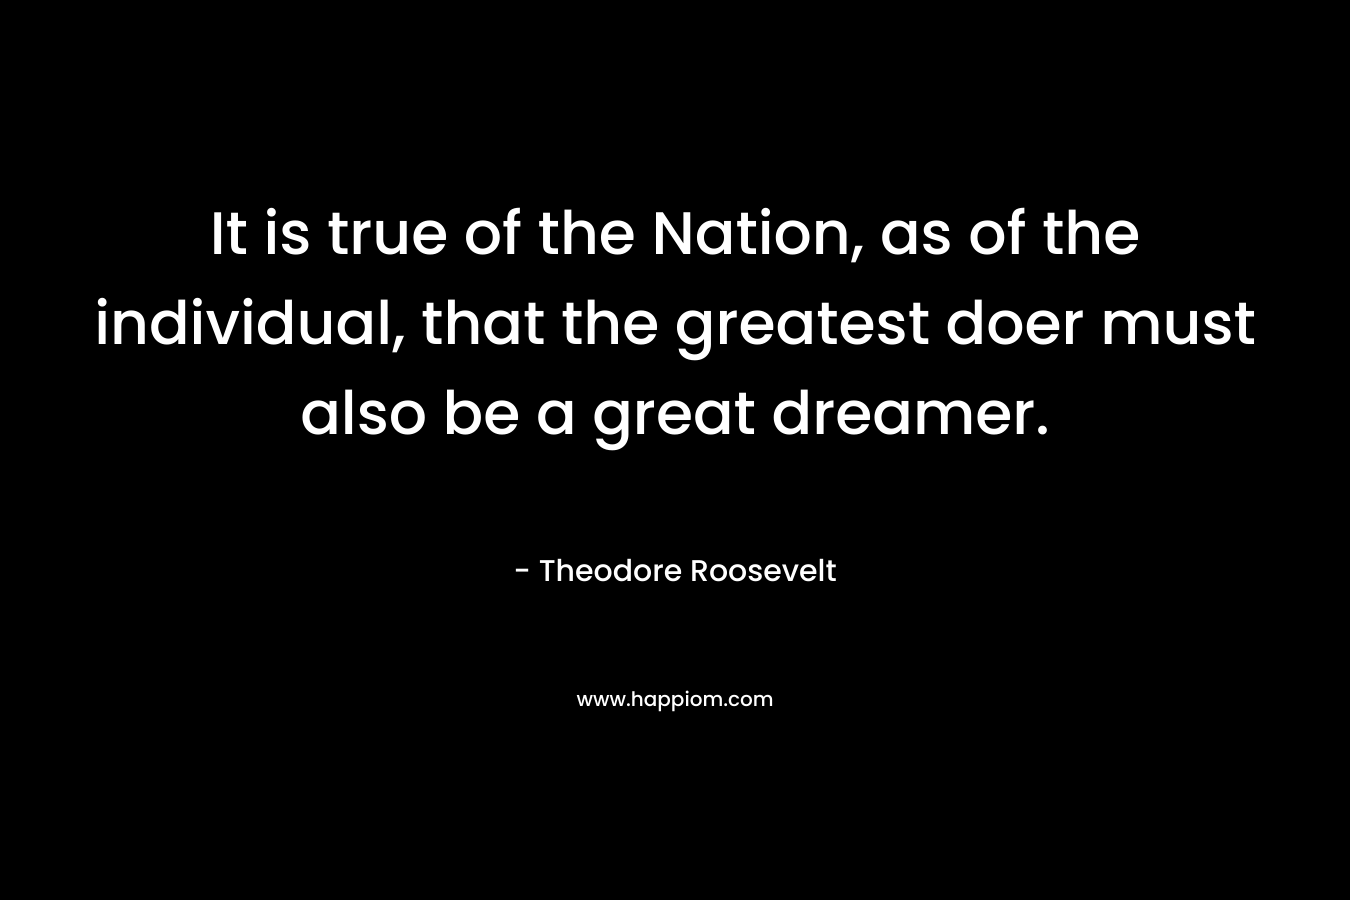 It is true of the Nation, as of the individual, that the greatest doer must also be a great dreamer. – Theodore Roosevelt